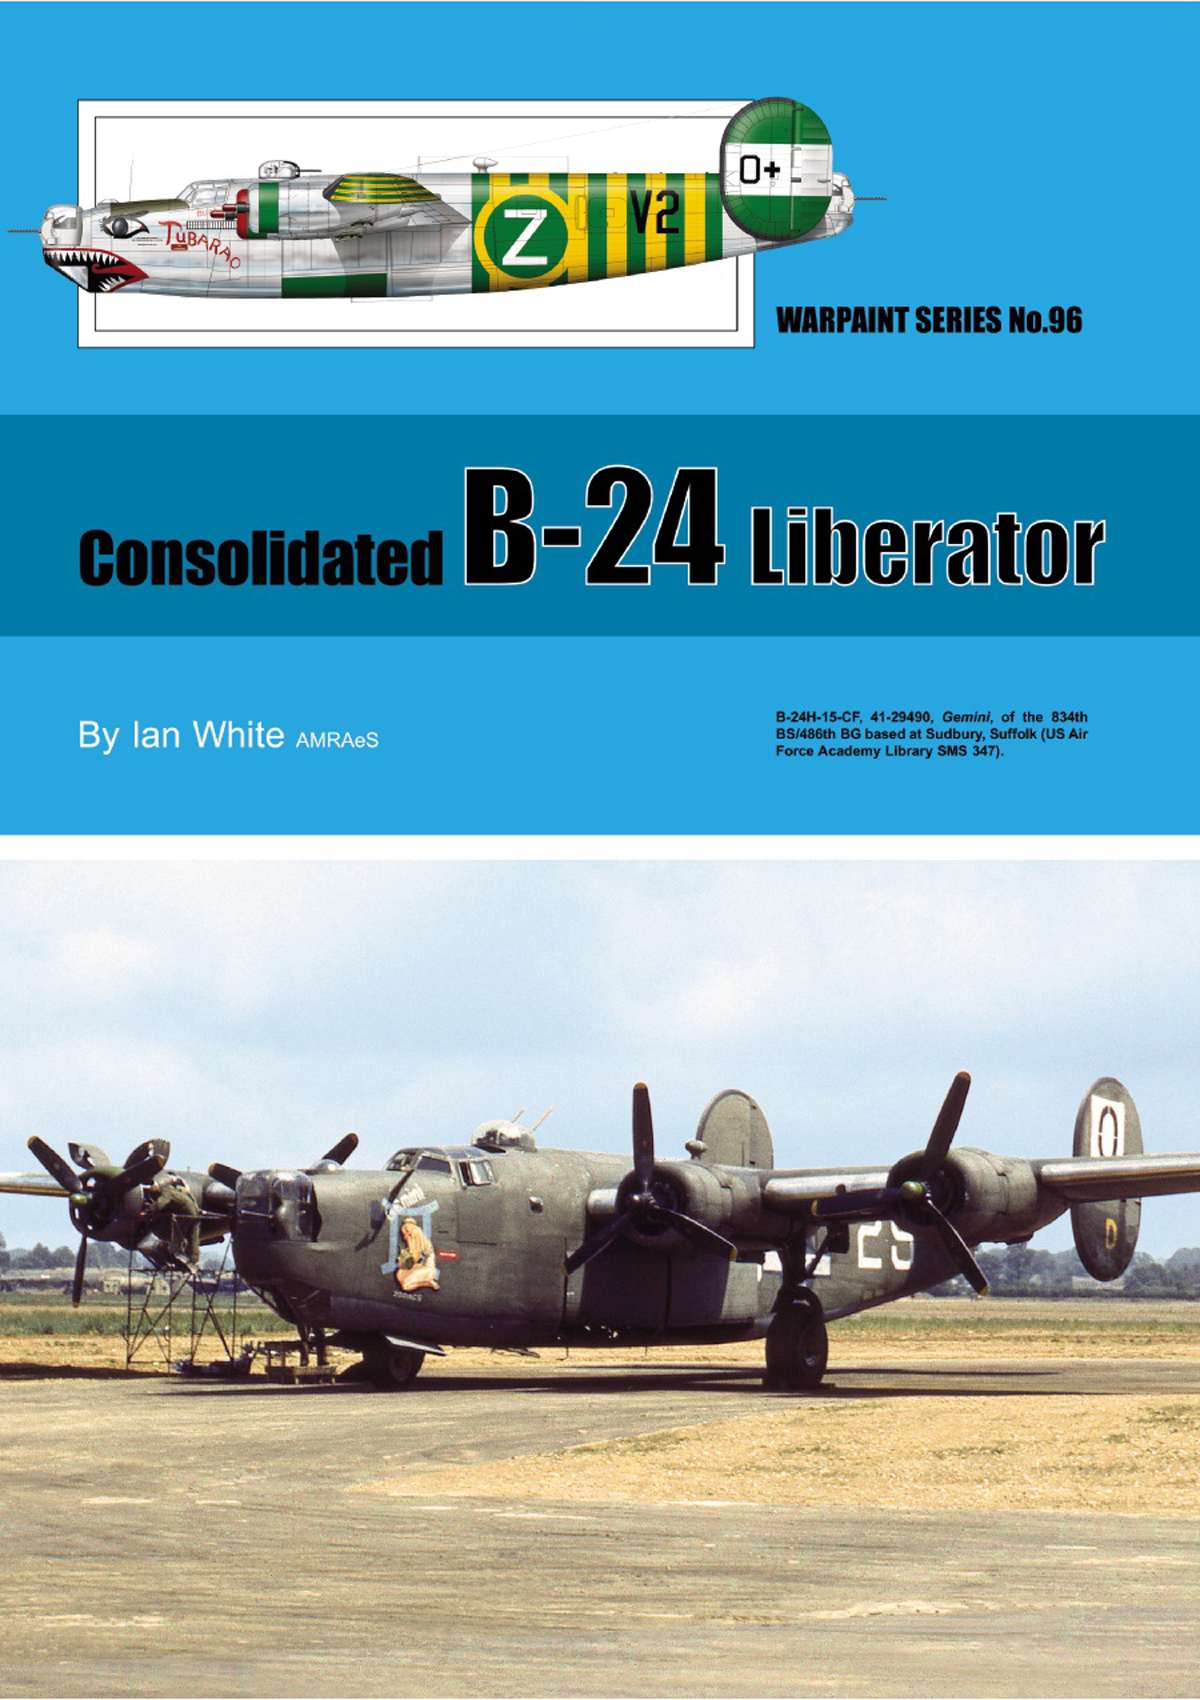 N96 - Consolidated B-24 Liberator